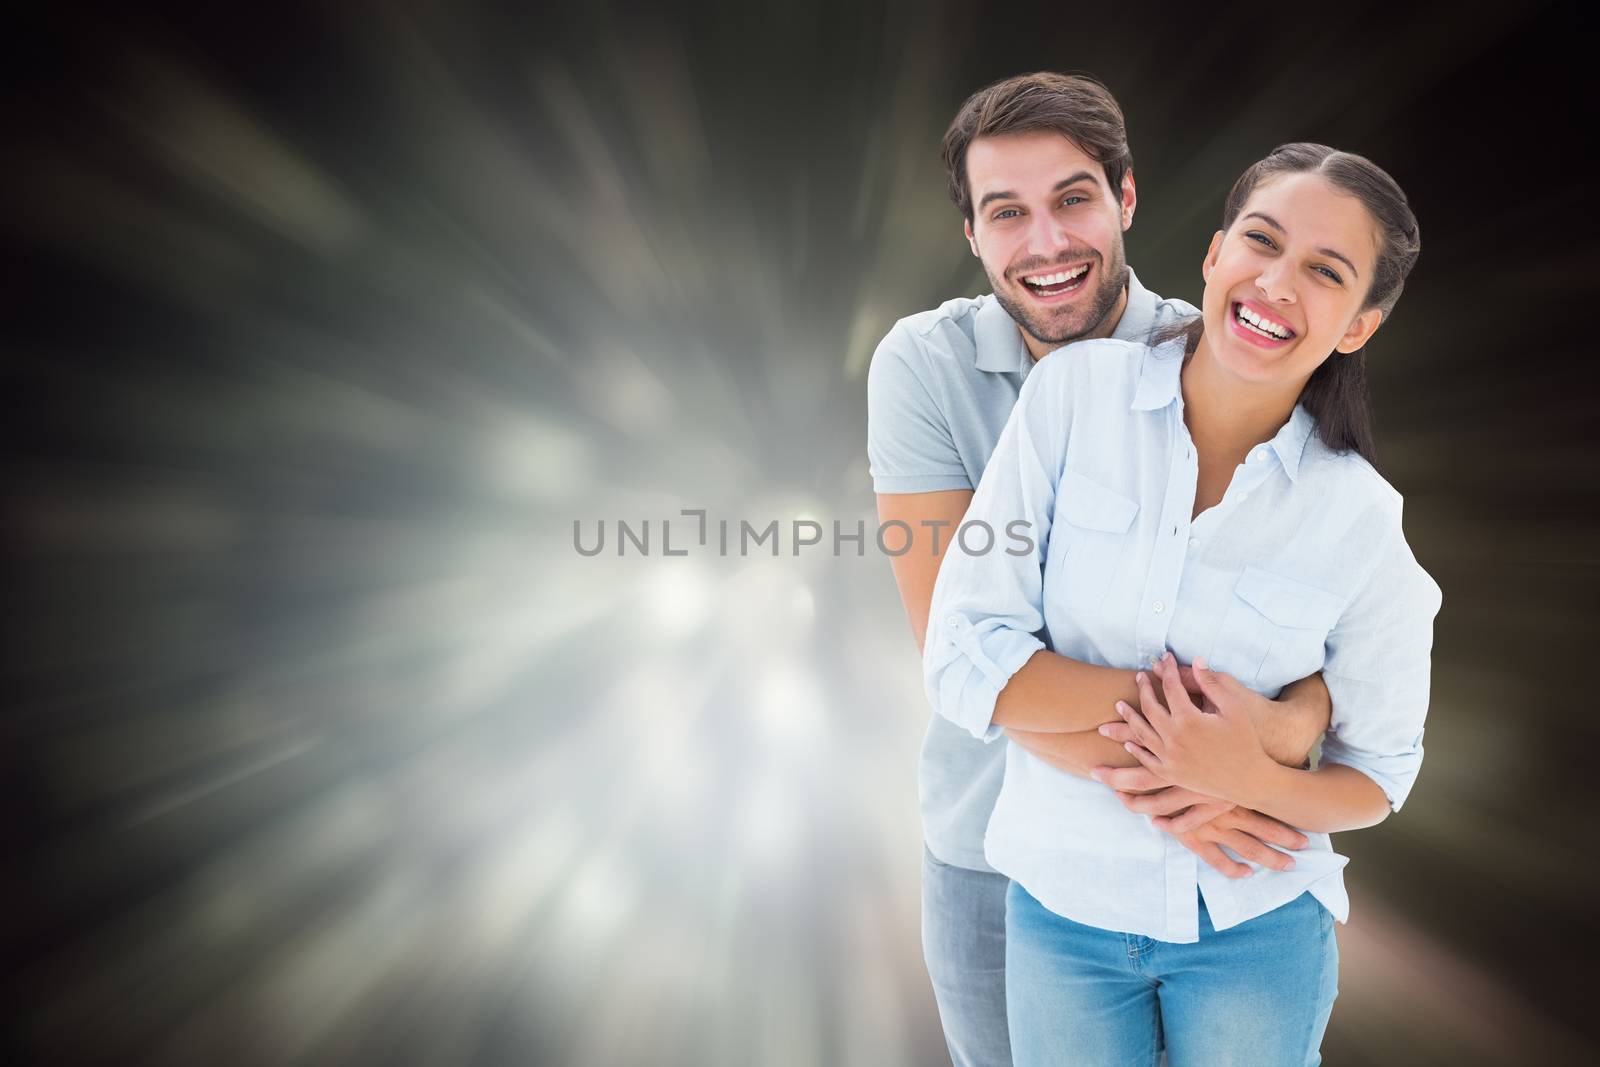 Cute couple hugging and smiling at camera against black abstract light spot design